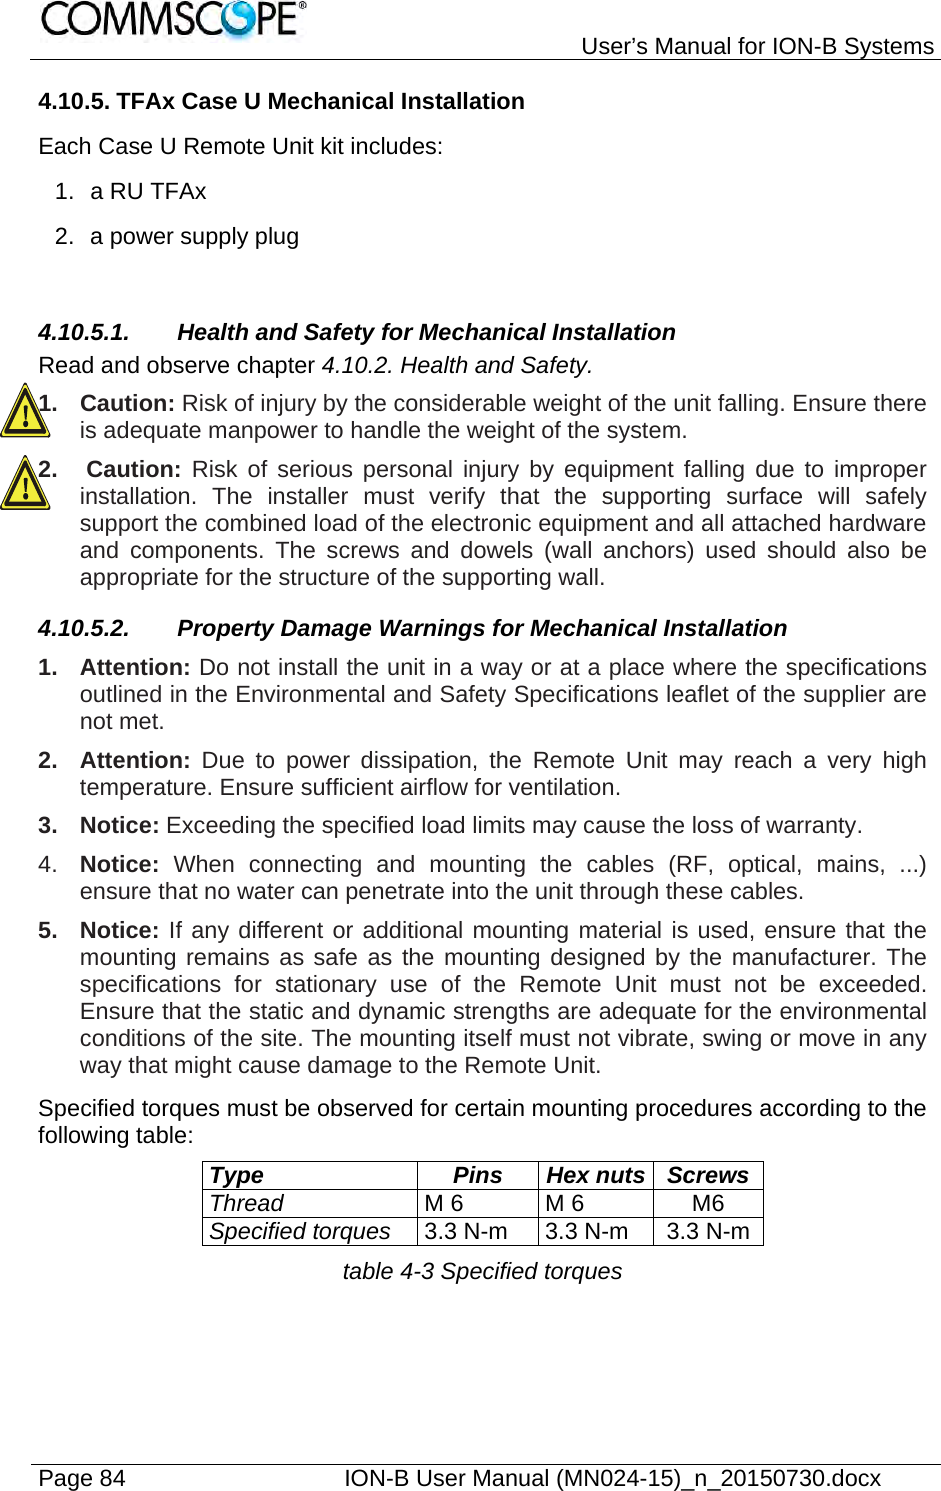   User’s Manual for ION-B Systems Page 84    ION-B User Manual (MN024-15)_n_20150730.docx  4.10.5. TFAx Case U Mechanical Installation Each Case U Remote Unit kit includes: 1. a RU TFAx 2.  a power supply plug  4.10.5.1. Health and Safety for Mechanical Installation Read and observe chapter 4.10.2. Health and Safety. 1. Caution: Risk of injury by the considerable weight of the unit falling. Ensure there is adequate manpower to handle the weight of the system. 2.   Caution: Risk of serious personal injury by equipment falling due to improper installation. The installer must verify that the supporting surface will safely support the combined load of the electronic equipment and all attached hardware and components. The screws and dowels (wall anchors) used should also be appropriate for the structure of the supporting wall. 4.10.5.2.  Property Damage Warnings for Mechanical Installation 1. Attention: Do not install the unit in a way or at a place where the specifications outlined in the Environmental and Safety Specifications leaflet of the supplier are not met. 2. Attention: Due to power dissipation, the Remote Unit may reach a very high temperature. Ensure sufficient airflow for ventilation. 3. Notice: Exceeding the specified load limits may cause the loss of warranty. 4.  Notice:  When connecting and mounting the cables (RF, optical, mains, ...) ensure that no water can penetrate into the unit through these cables. 5. Notice: If any different or additional mounting material is used, ensure that the mounting remains as safe as the mounting designed by the manufacturer. The specifications for stationary use of the Remote Unit must not be exceeded. Ensure that the static and dynamic strengths are adequate for the environmental conditions of the site. The mounting itself must not vibrate, swing or move in any way that might cause damage to the Remote Unit. Specified torques must be observed for certain mounting procedures according to the following table: Type Pins Hex nuts Screws Thread M 6  M 6  M6 Specified torques 3.3 N-m  3.3 N-m  3.3 N-m table 4-3 Specified torques 